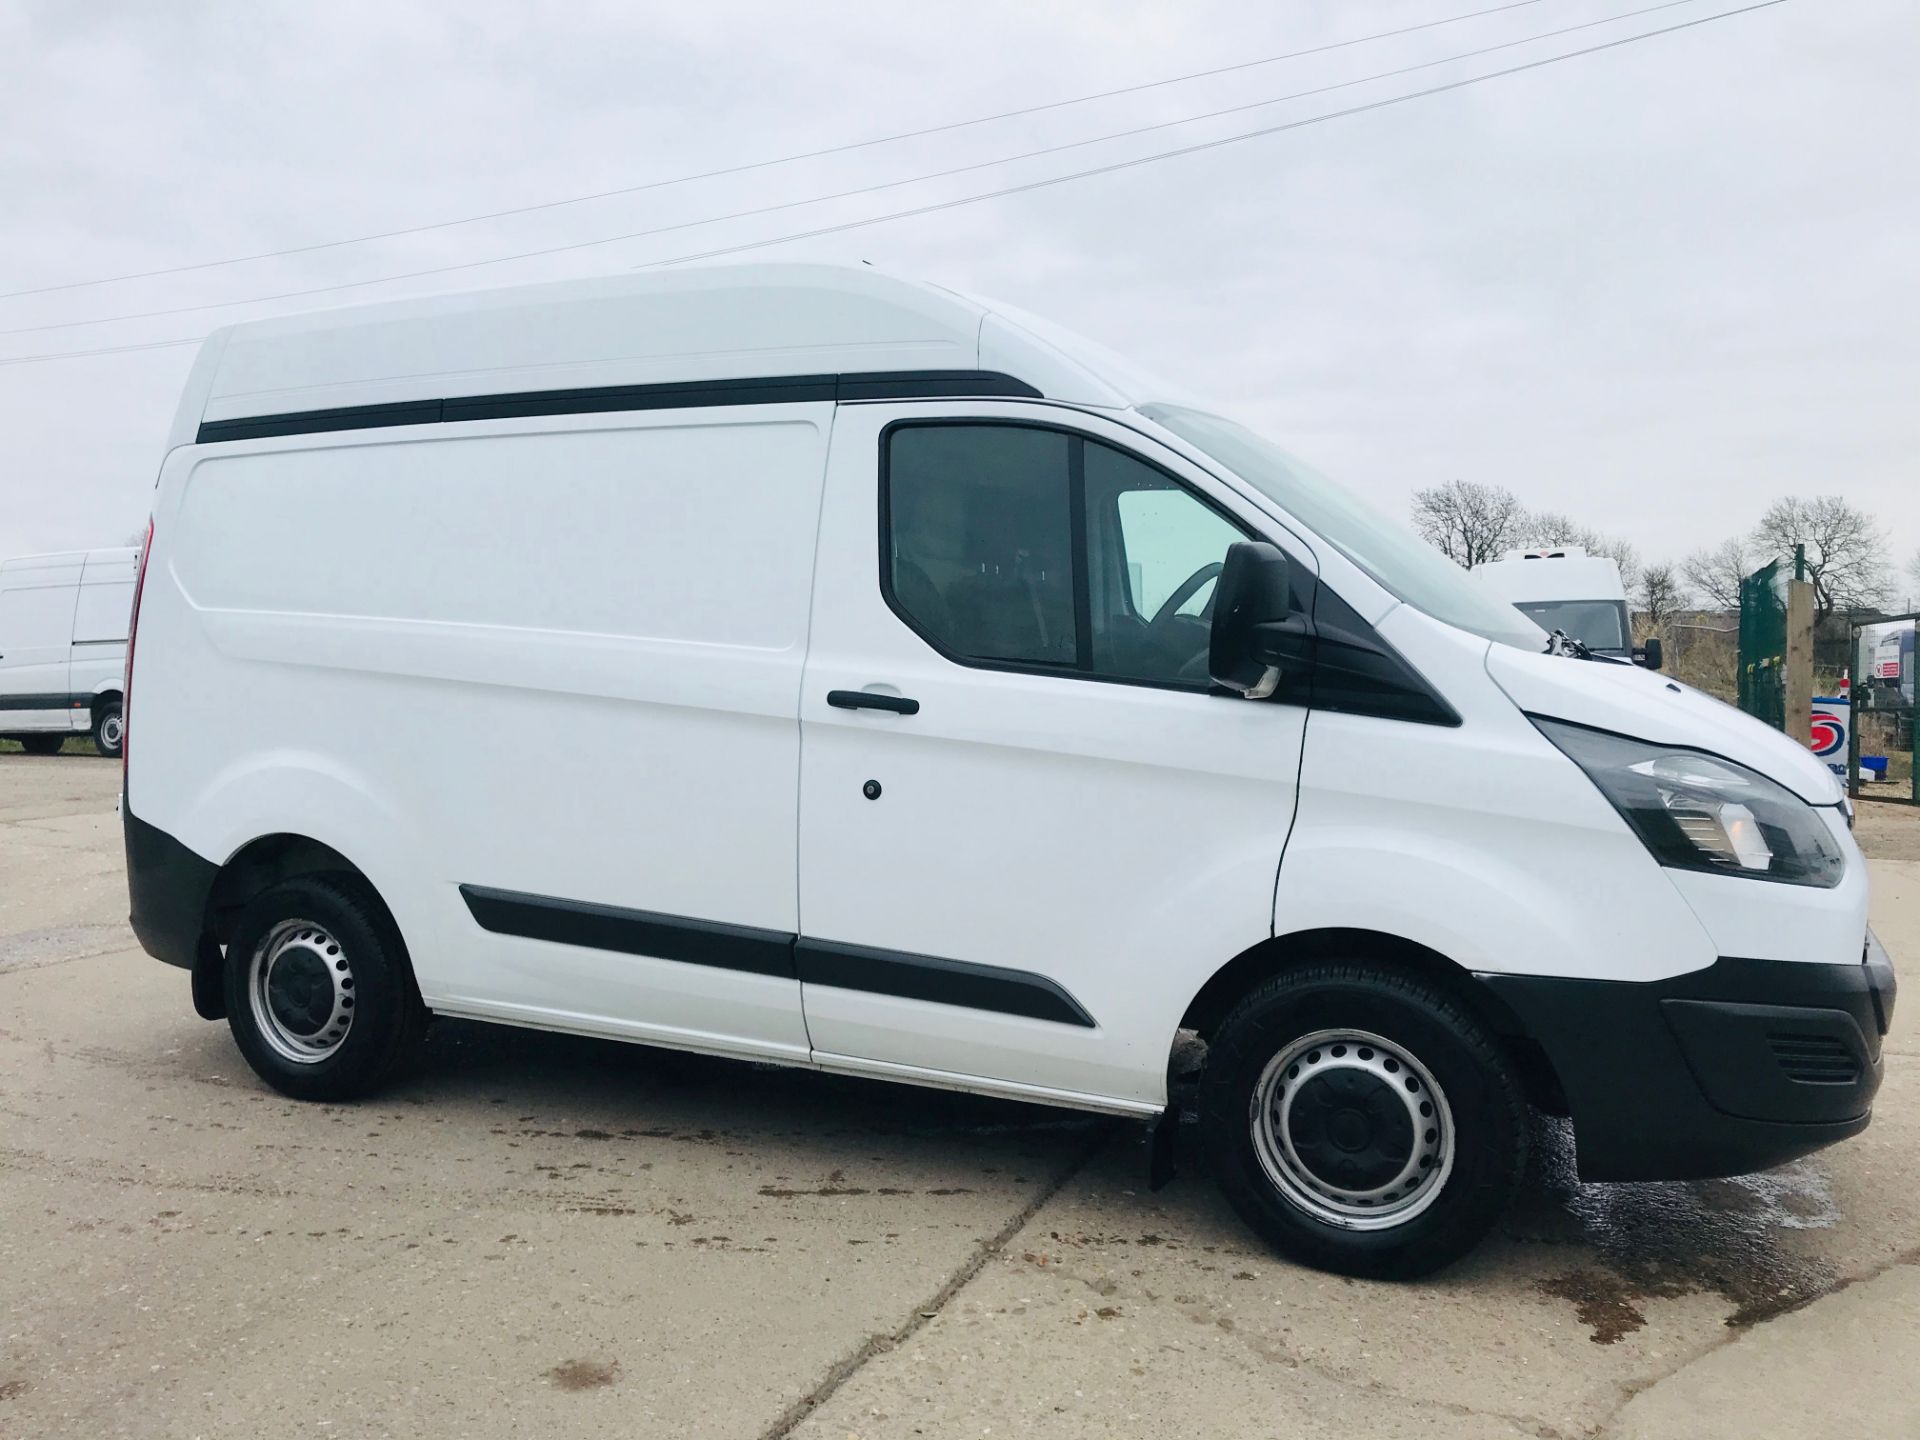 FORD TRANSIT CUSTOM ECO-TECH (2016 MODEL) HI TOP - 1 OWNER *AIR CON* *IDEADL CAMPER CONVERSION* - Image 11 of 32